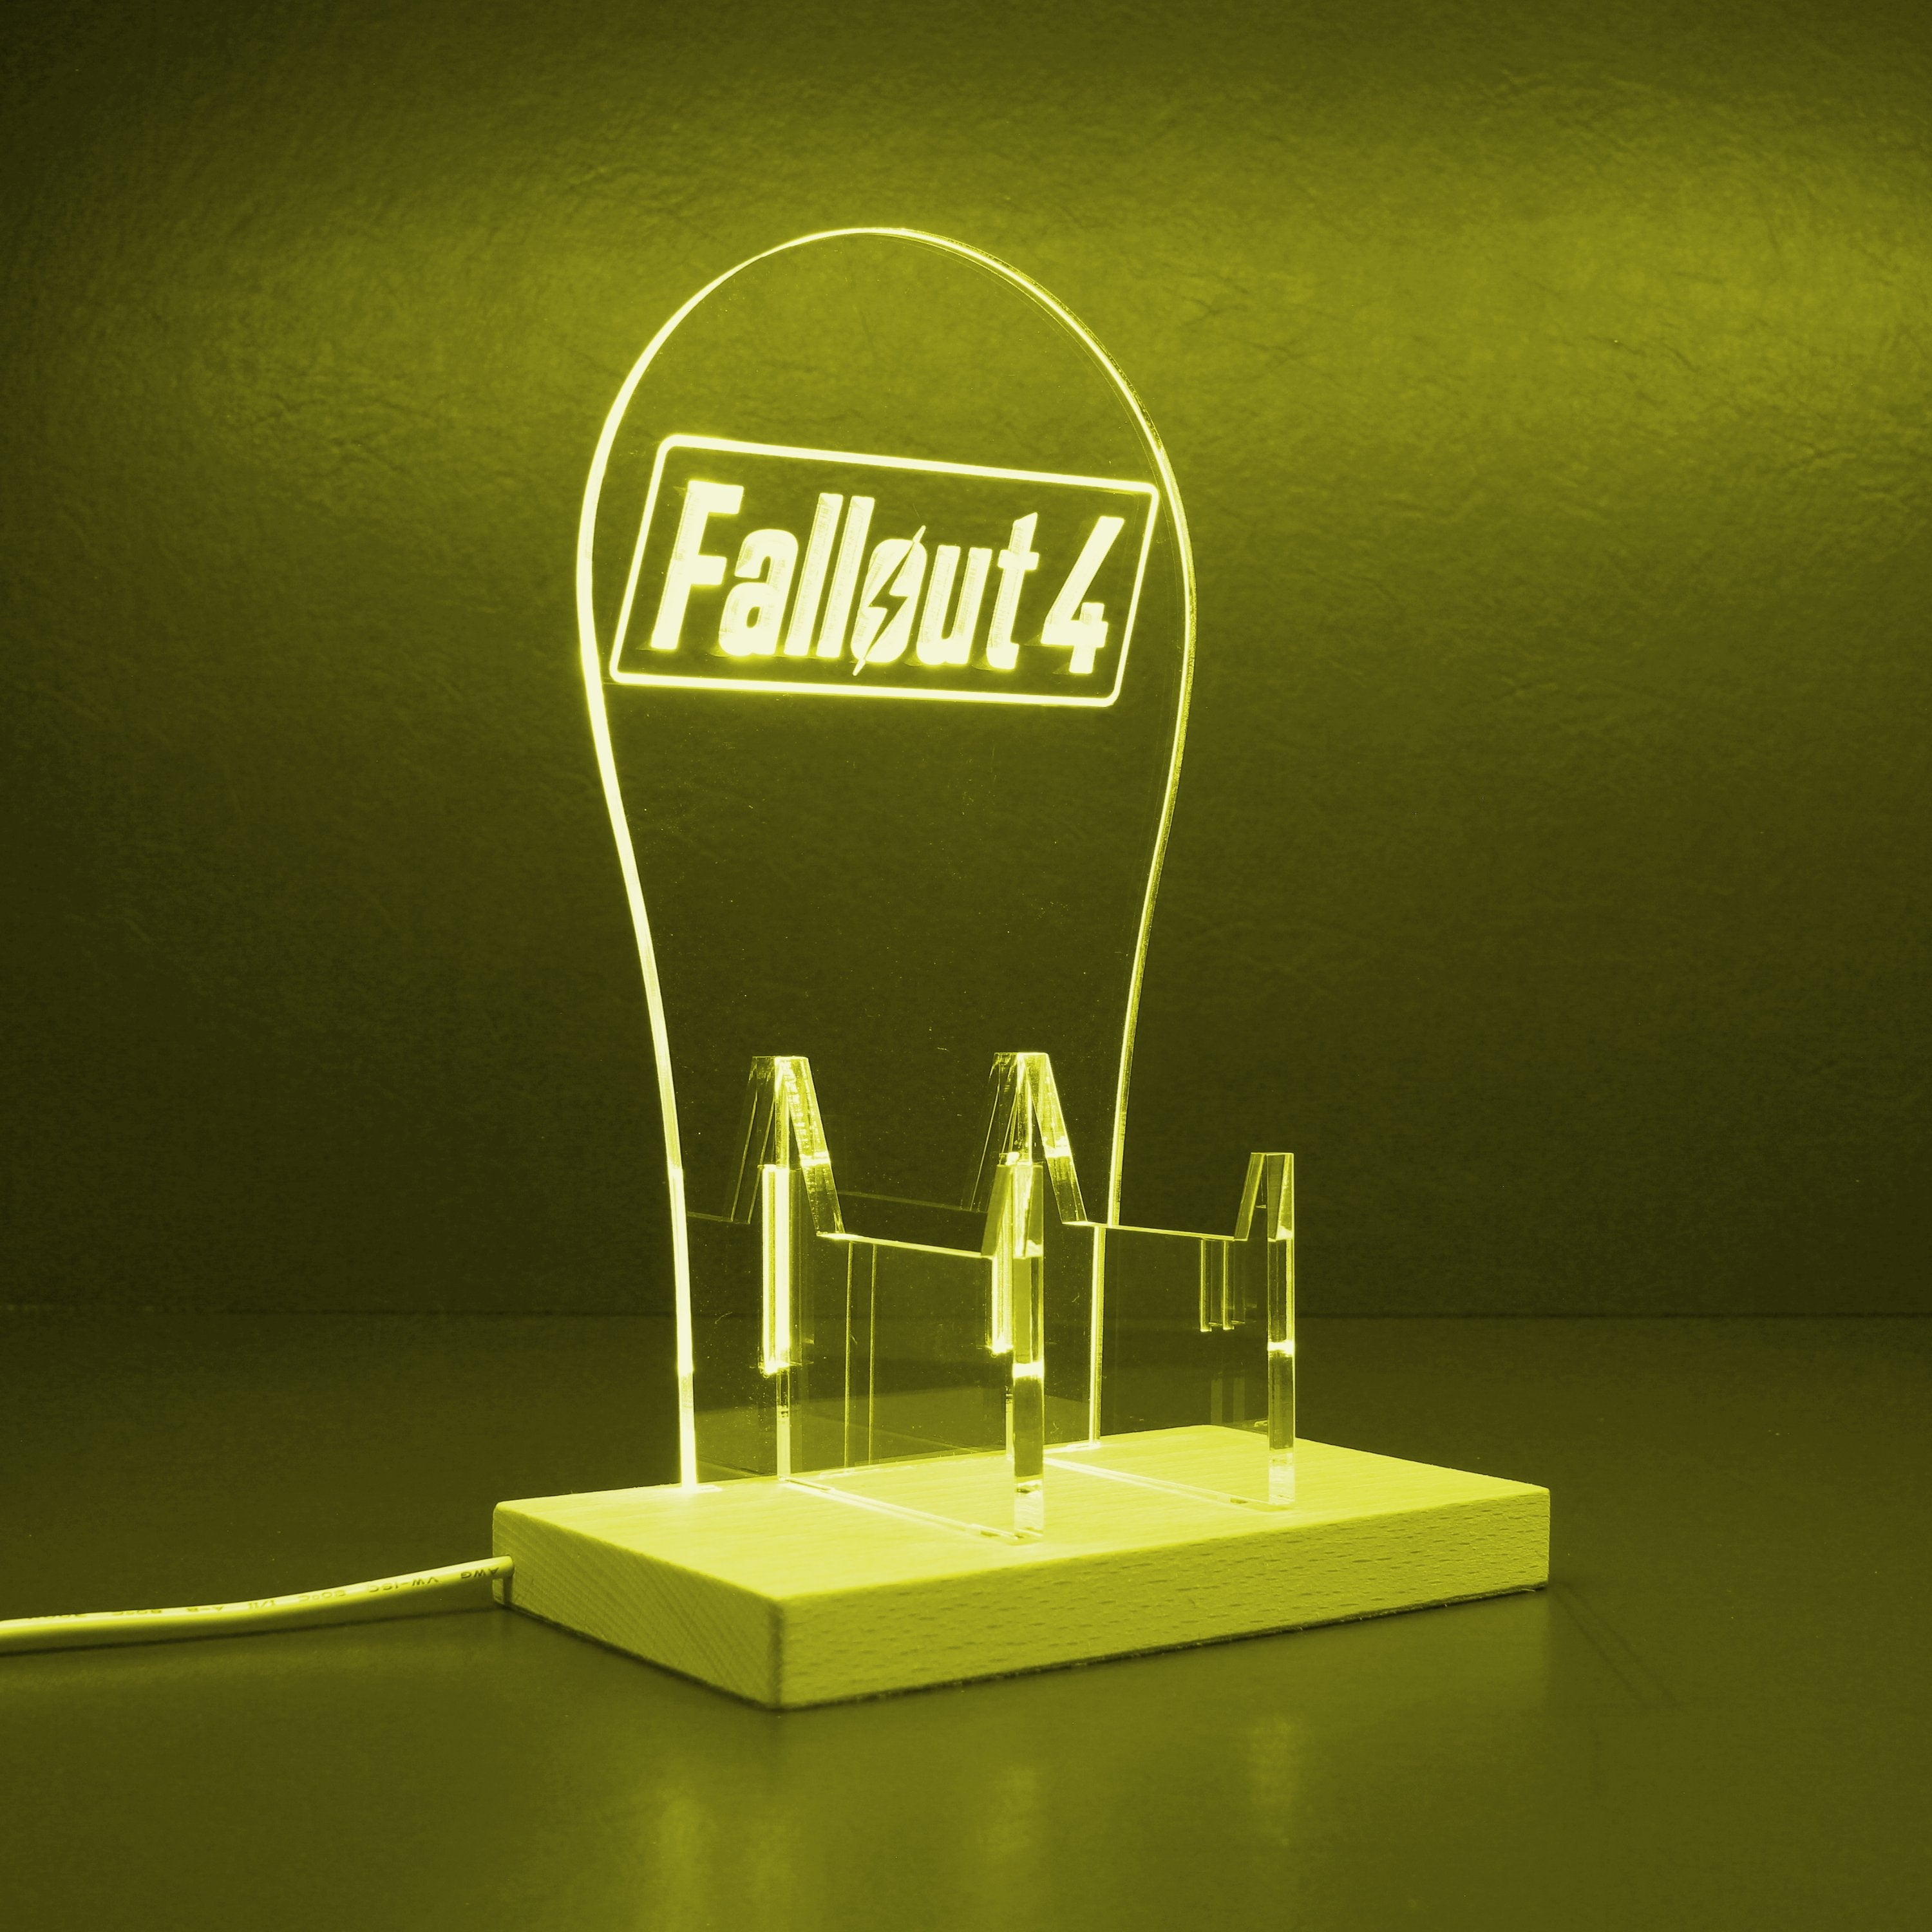 Fallout 4 LED Gaming Headset Controller Stand